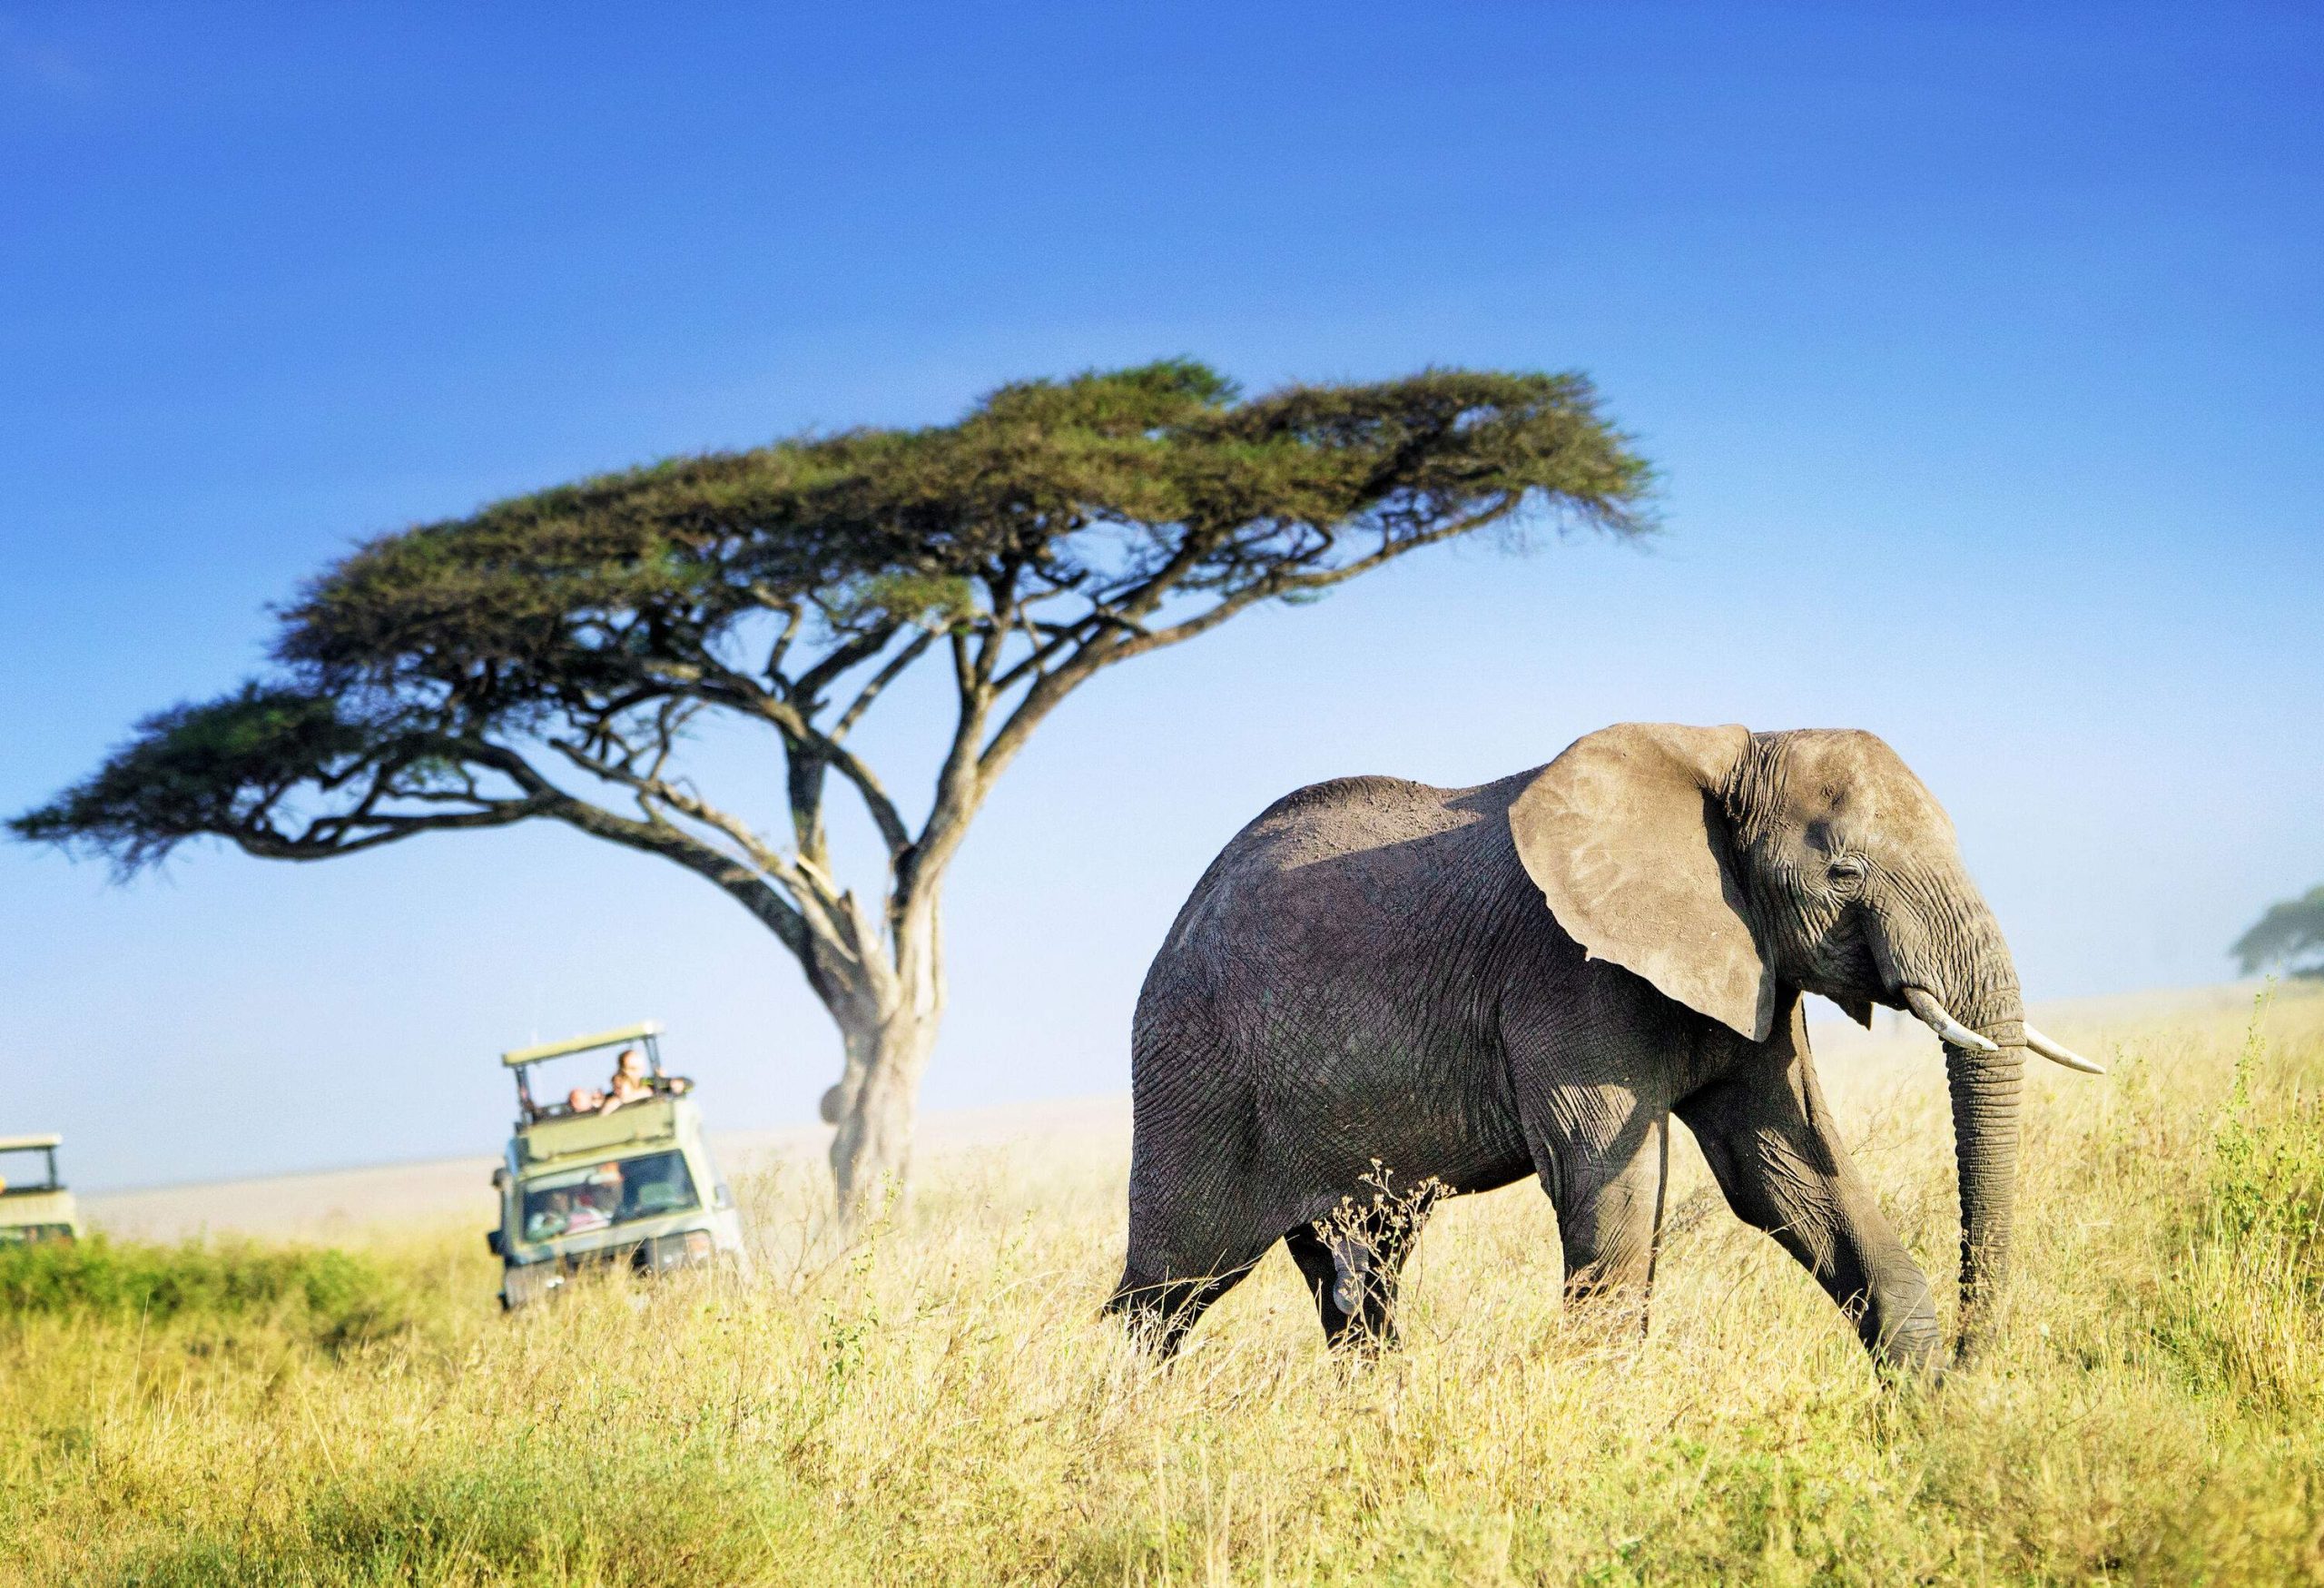 A magnificent African elephant moves smoothly across the vast plains, followed by two jeeps, with a lone tree standing tall in the backdrop.